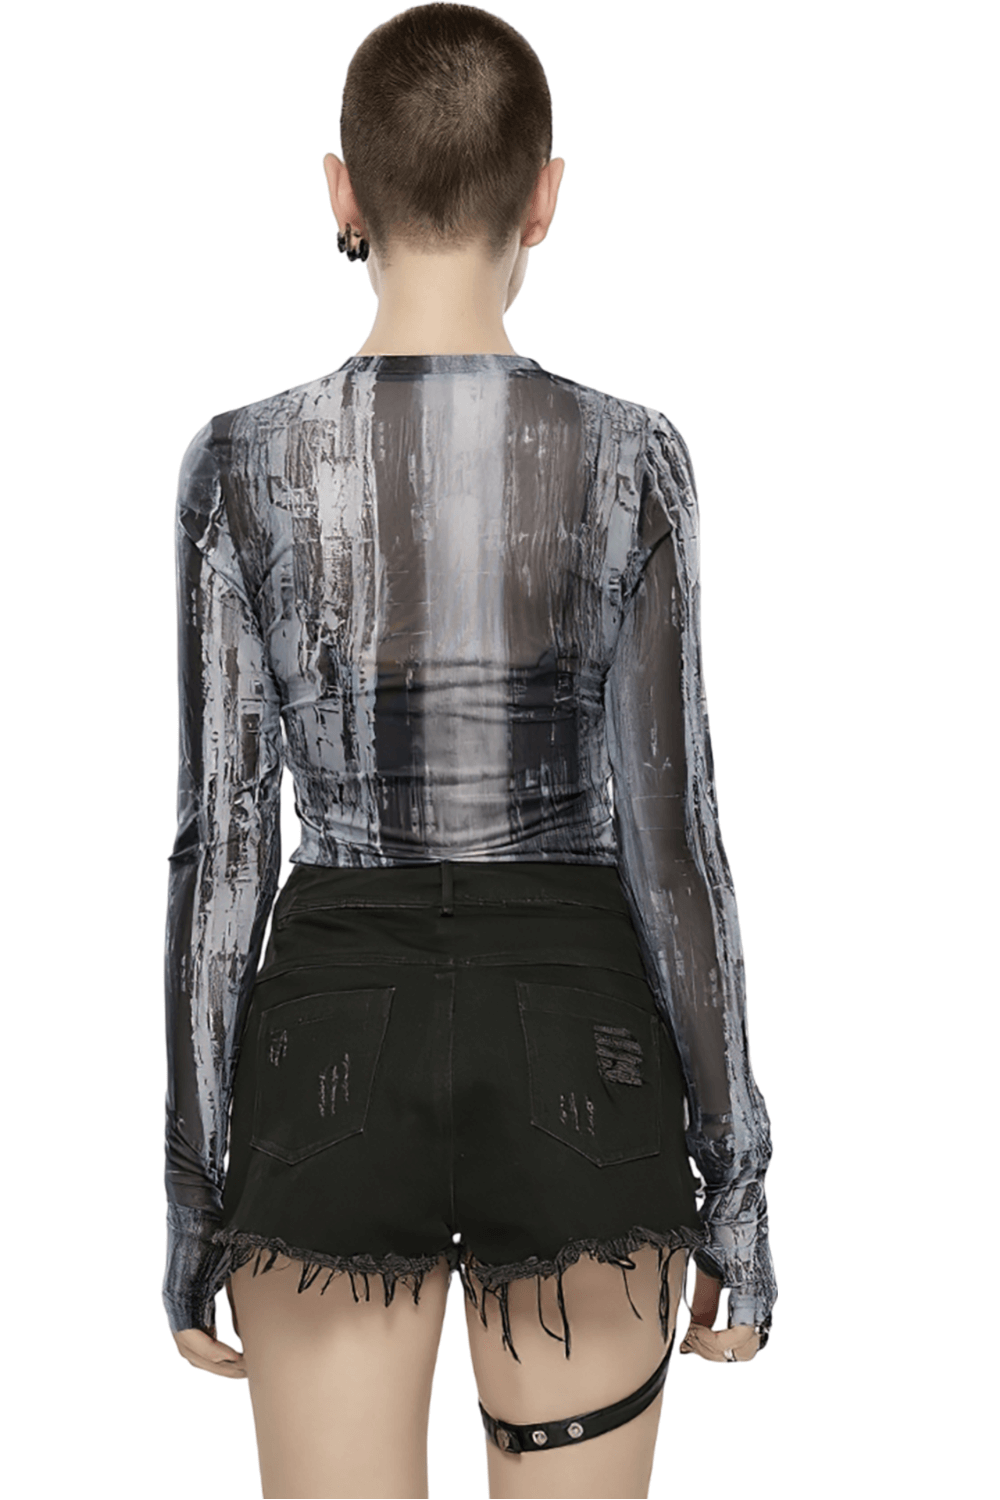 Sheer Striped Mesh Top with Long Sleeves and Thumb Holes